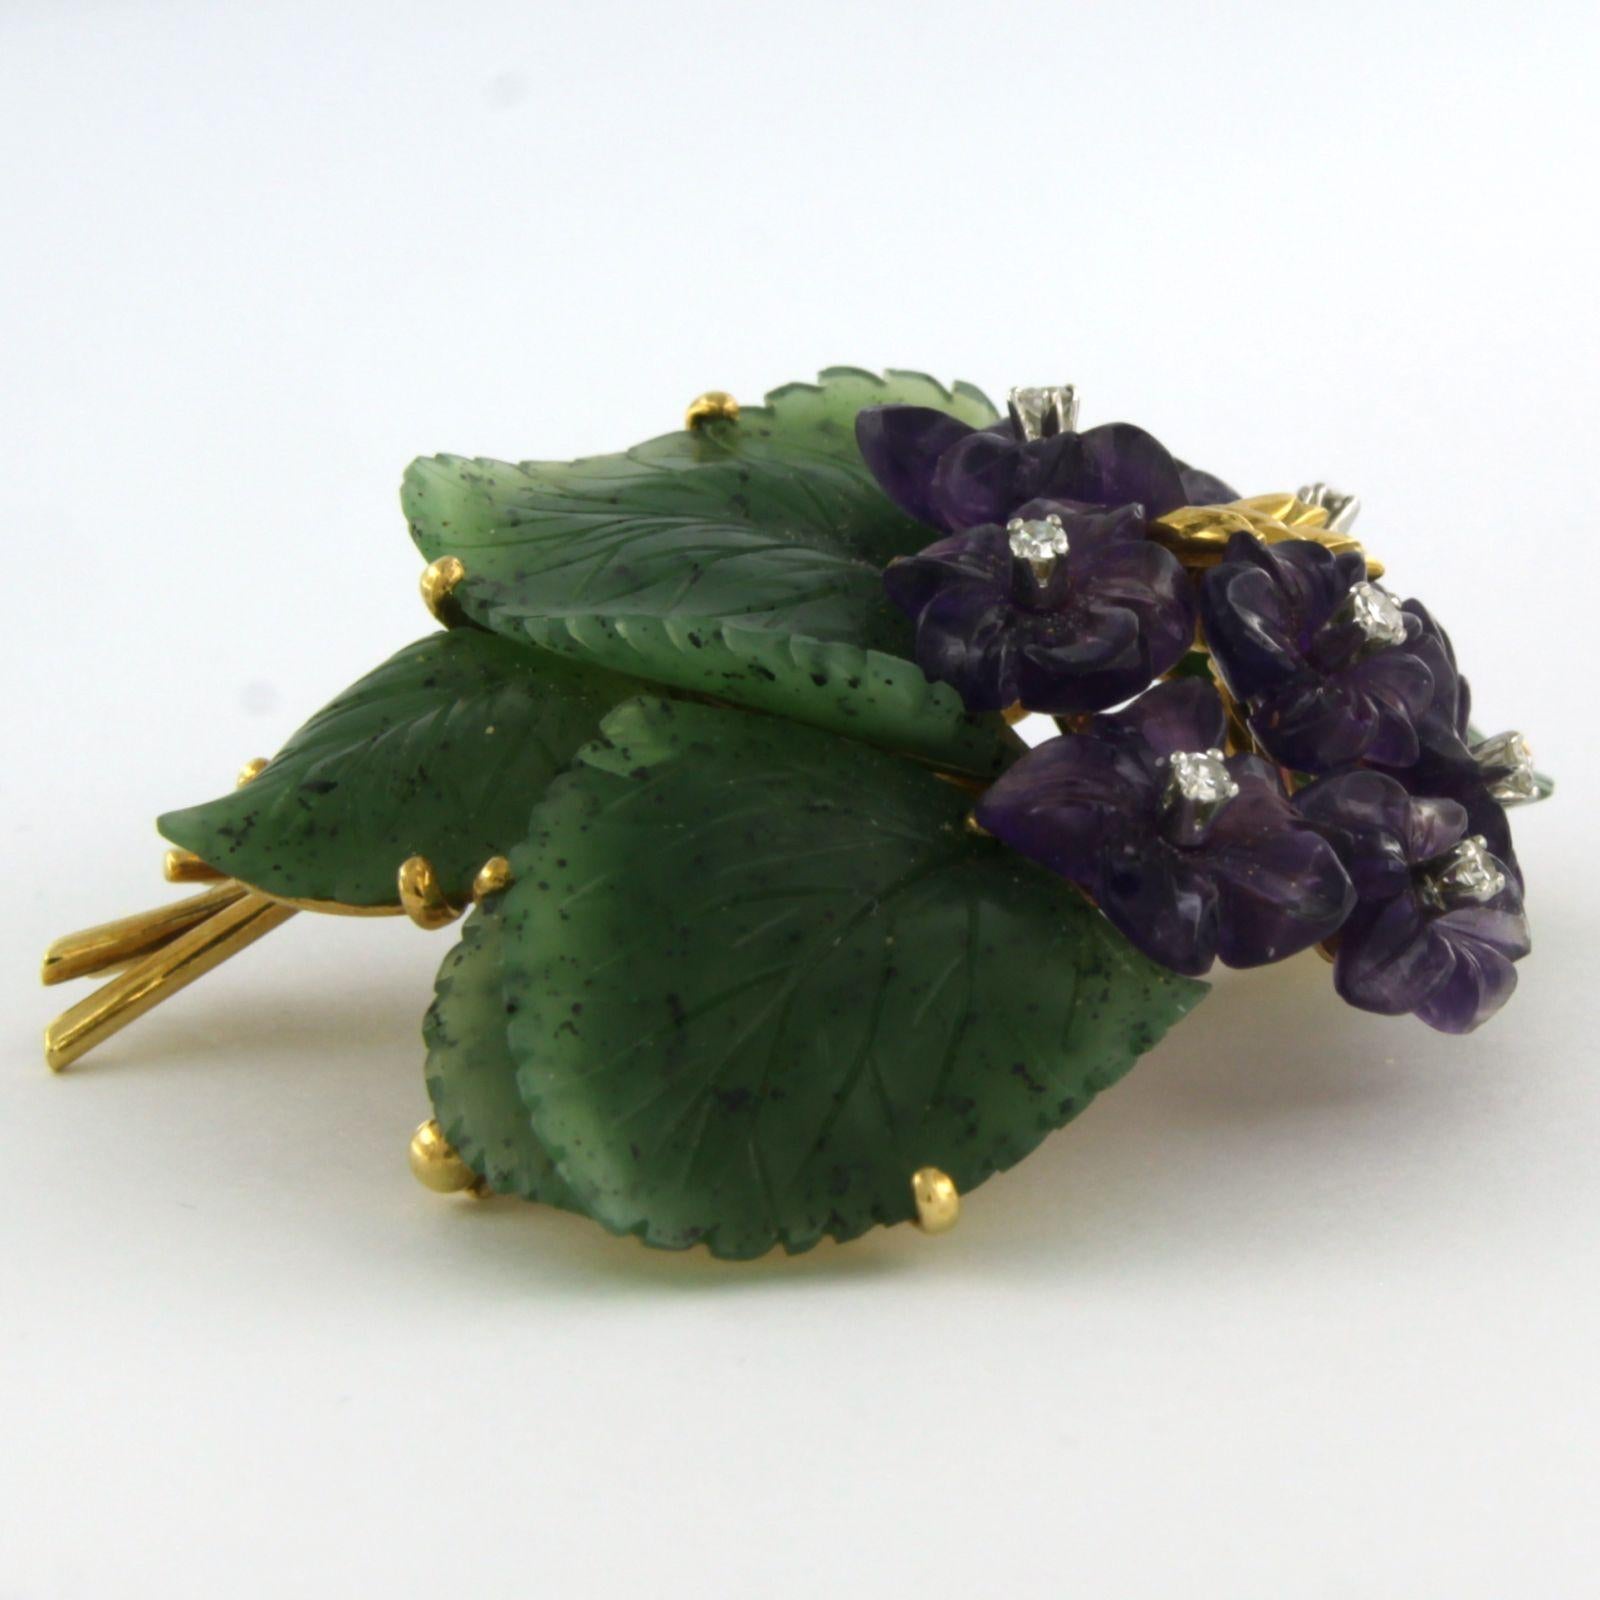 18k yellow gold flower brooch set with mosagate, amethyst and single cut diamonds 0.07 ct G/H VS/SI

detailed description:

the size of the brooch is 5.5 cm long by 4.5 cm wide and 1.7 cm high

weight 25.8 grams

Set with:

- 5 x leaf shape cut